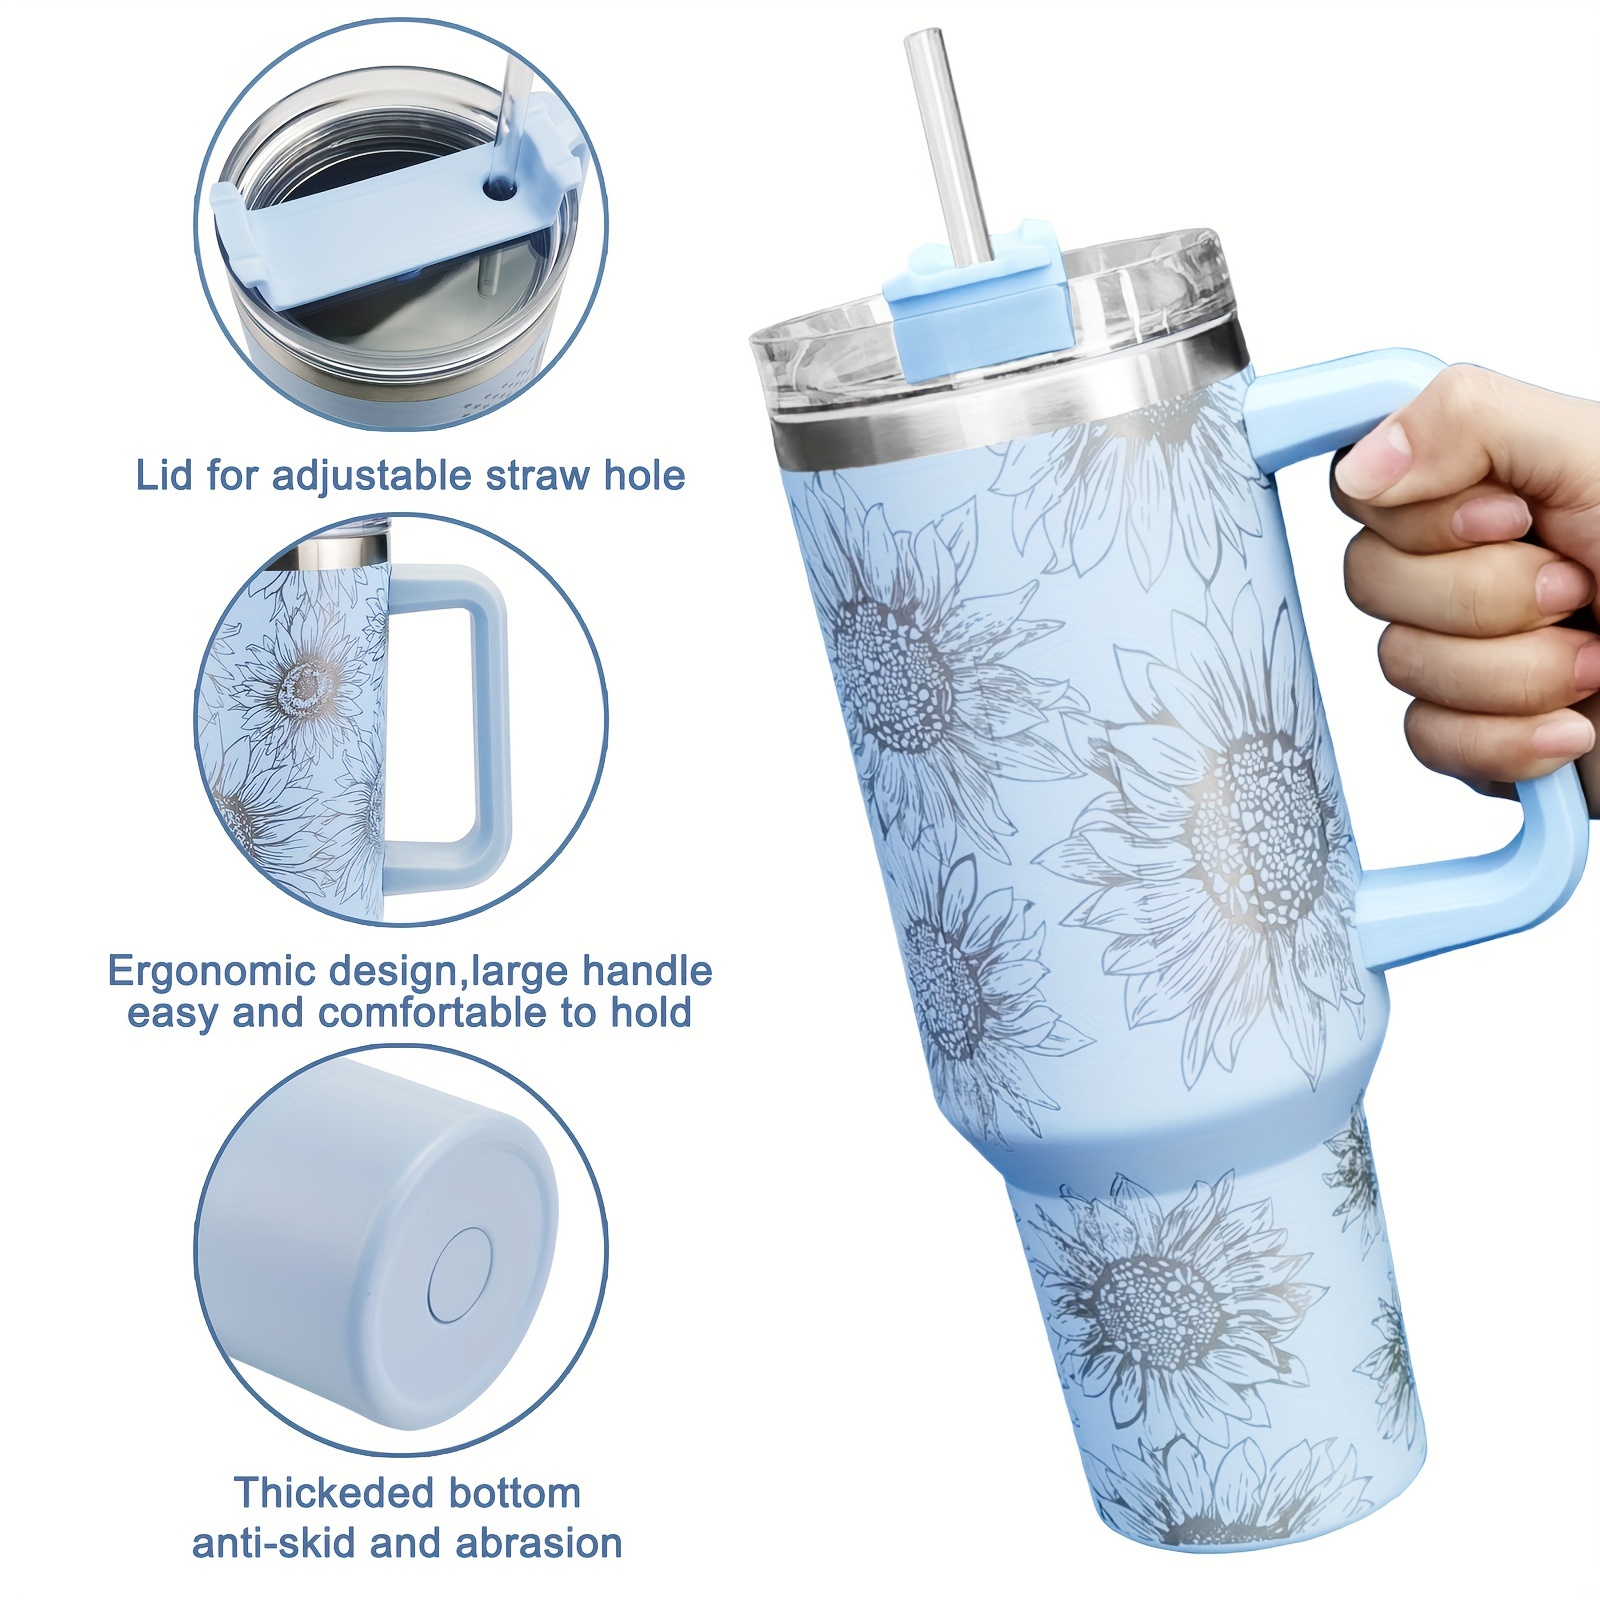 40 oz Adventure Quencher Travel Tumbler with Straw, Stainless Steel Insulated Mug, Maintains Heat Cold Ice for Hours, for Coffee Beer Water Beverages